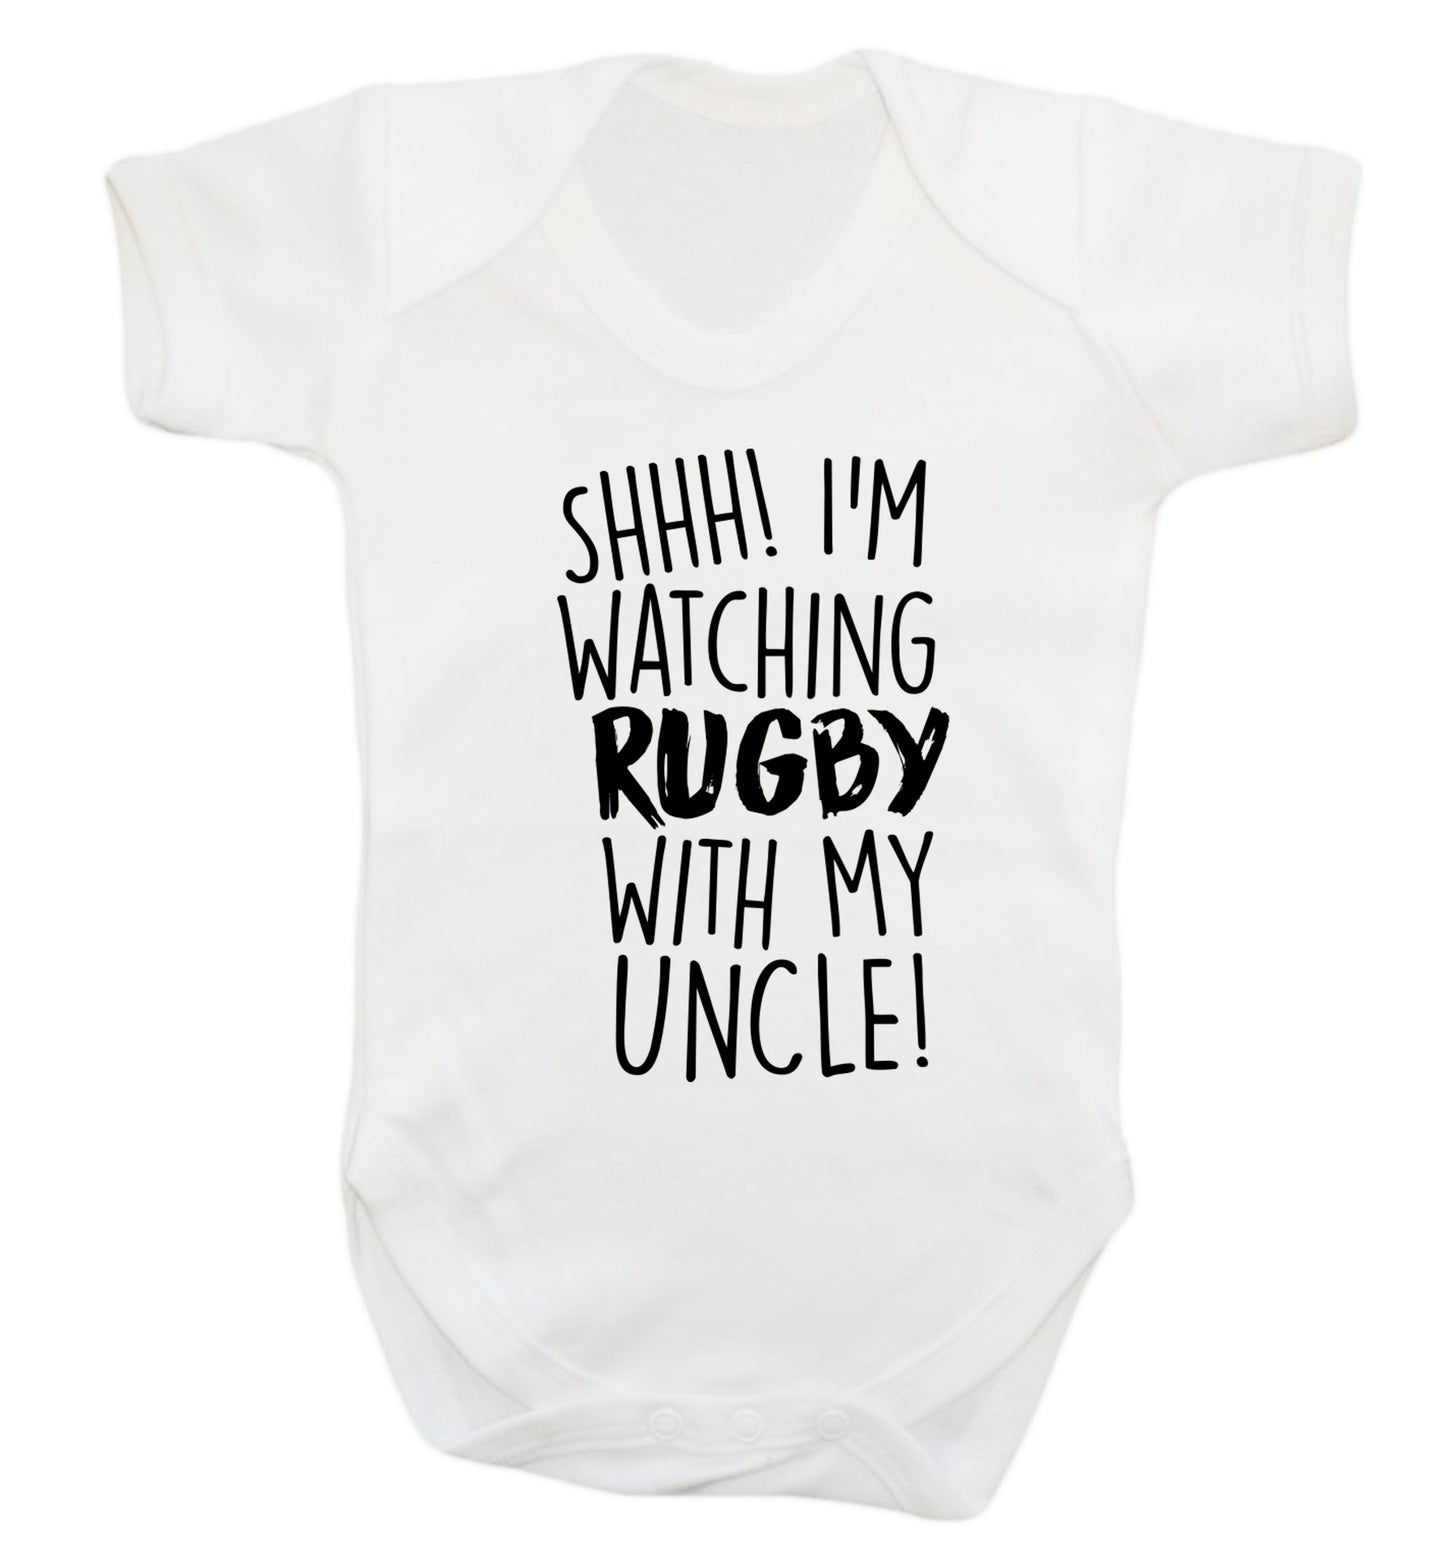 Shh.. I'm watching rugby with my uncle Baby Vest white 18-24 months